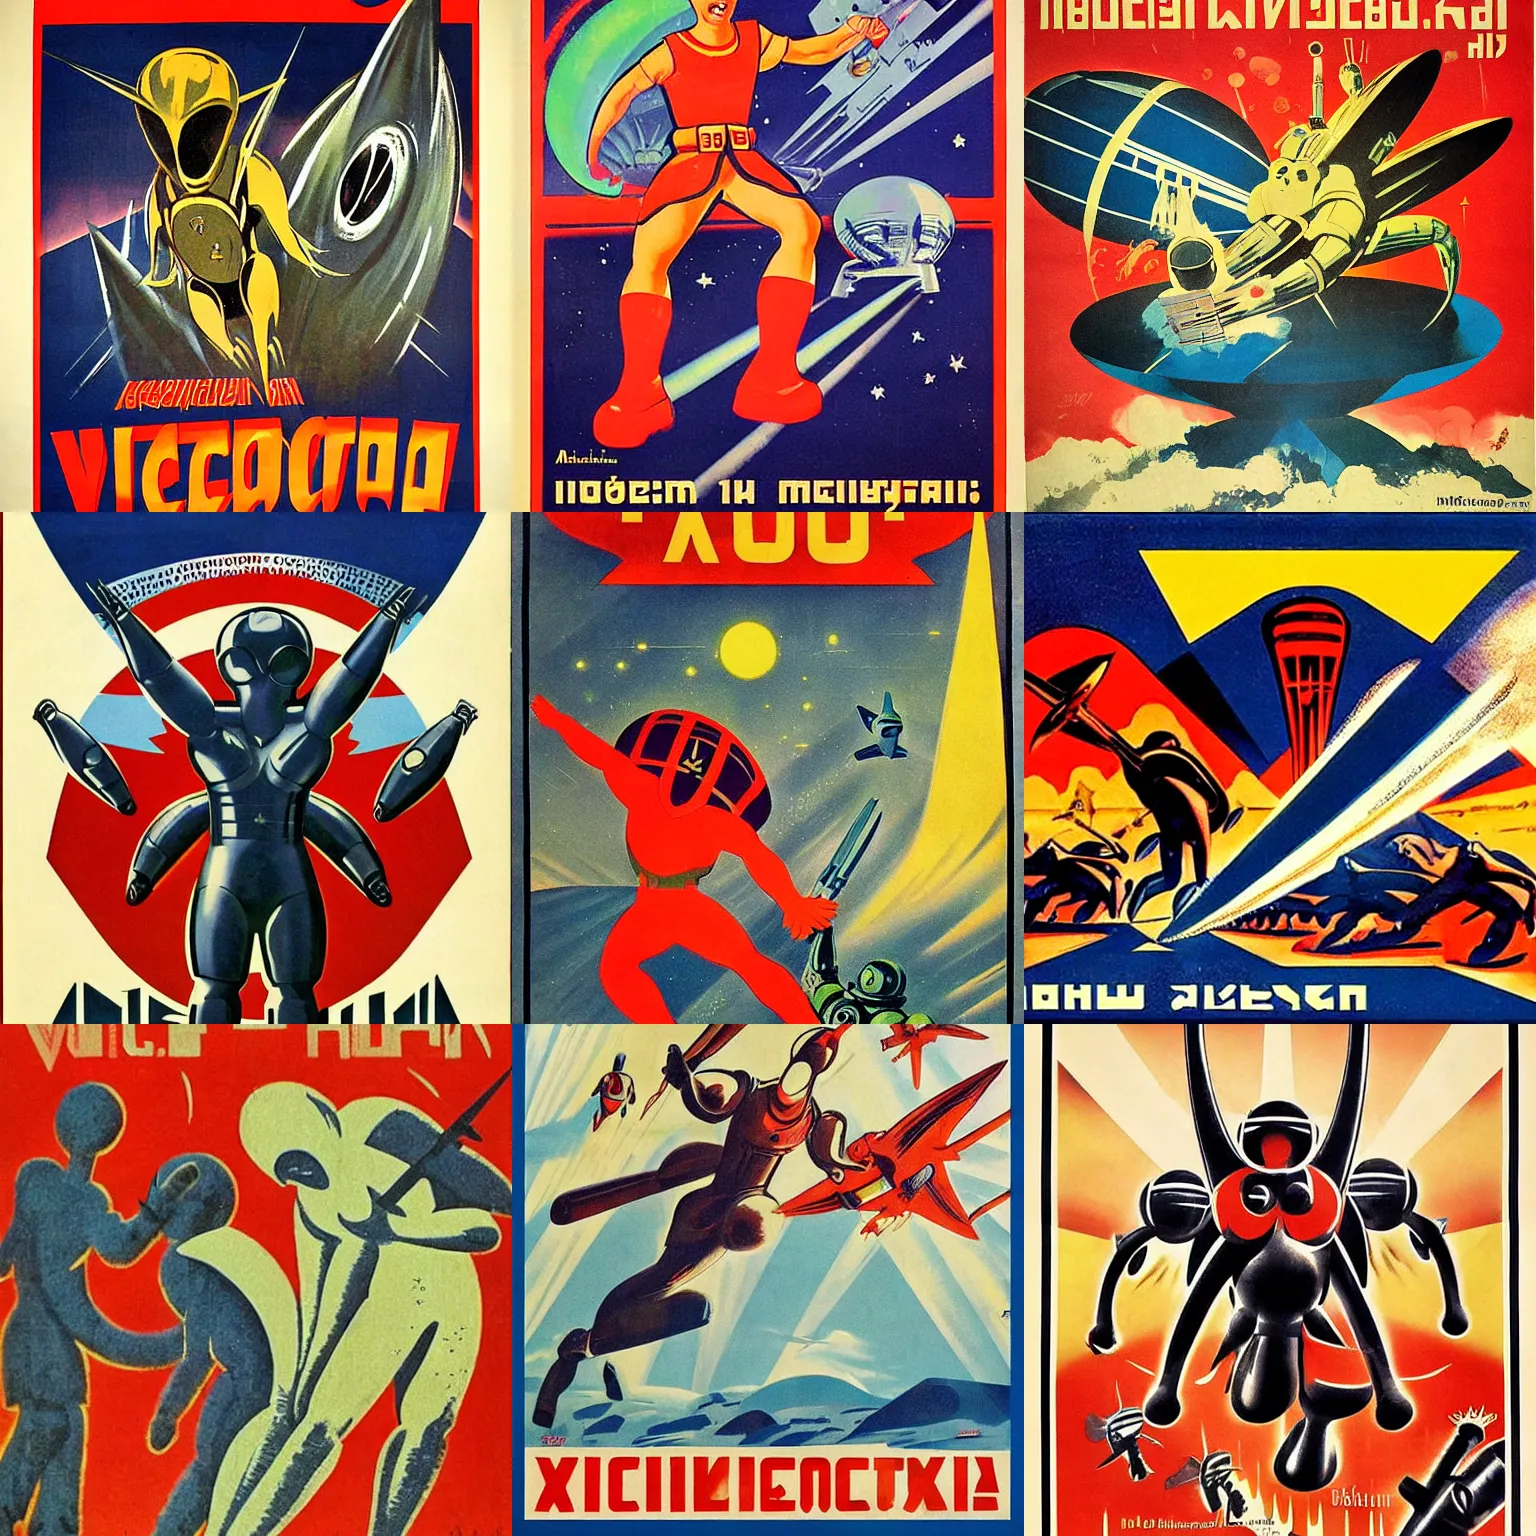 Prompt: 1 9 3 6 soviet propaganda poster depicting the victory against the aliens, by mikhail baljasnij